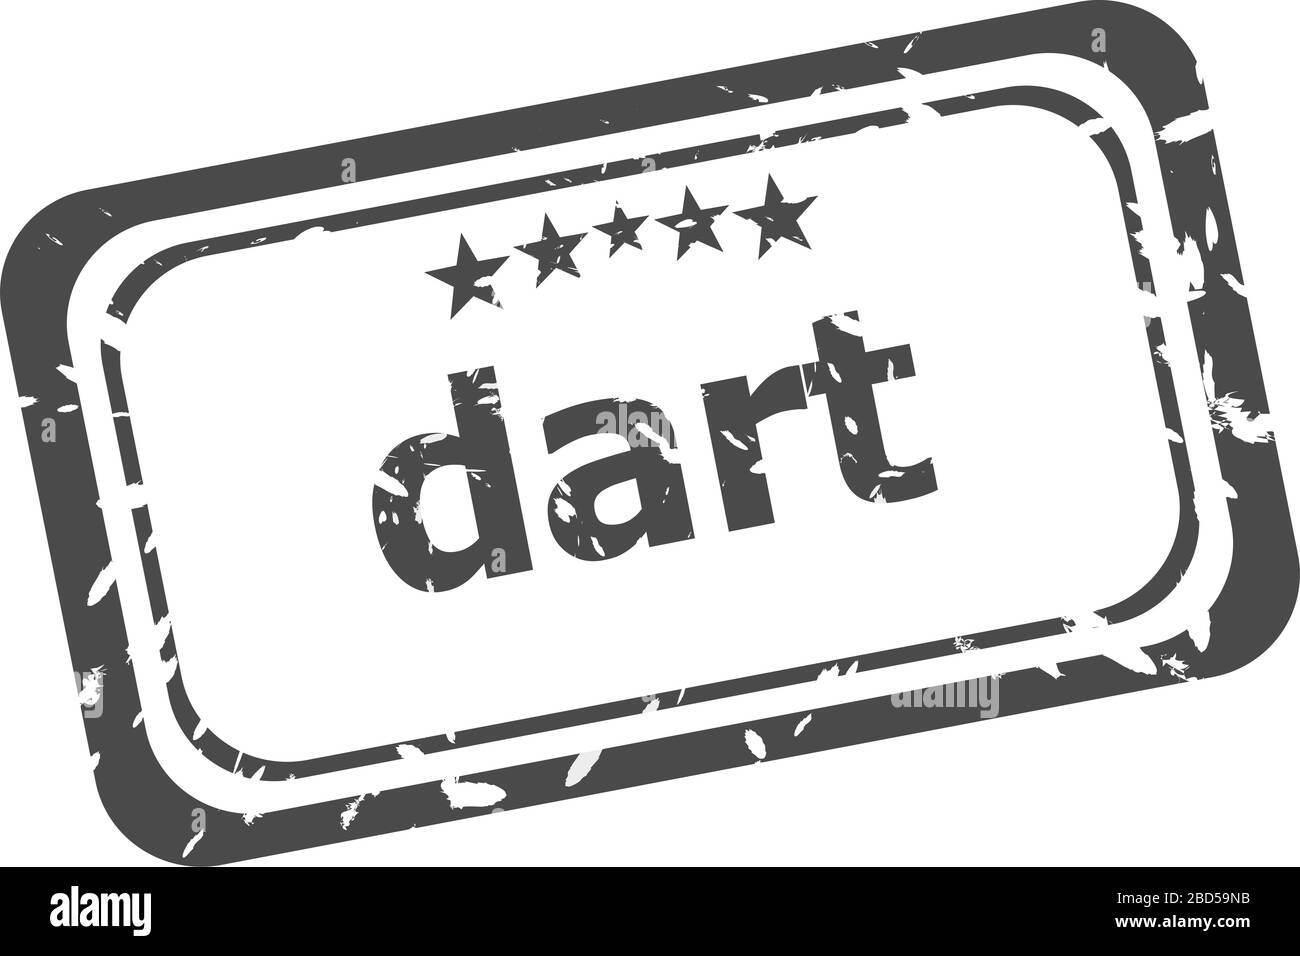 dart word on rubber old business stamp Stock Photo